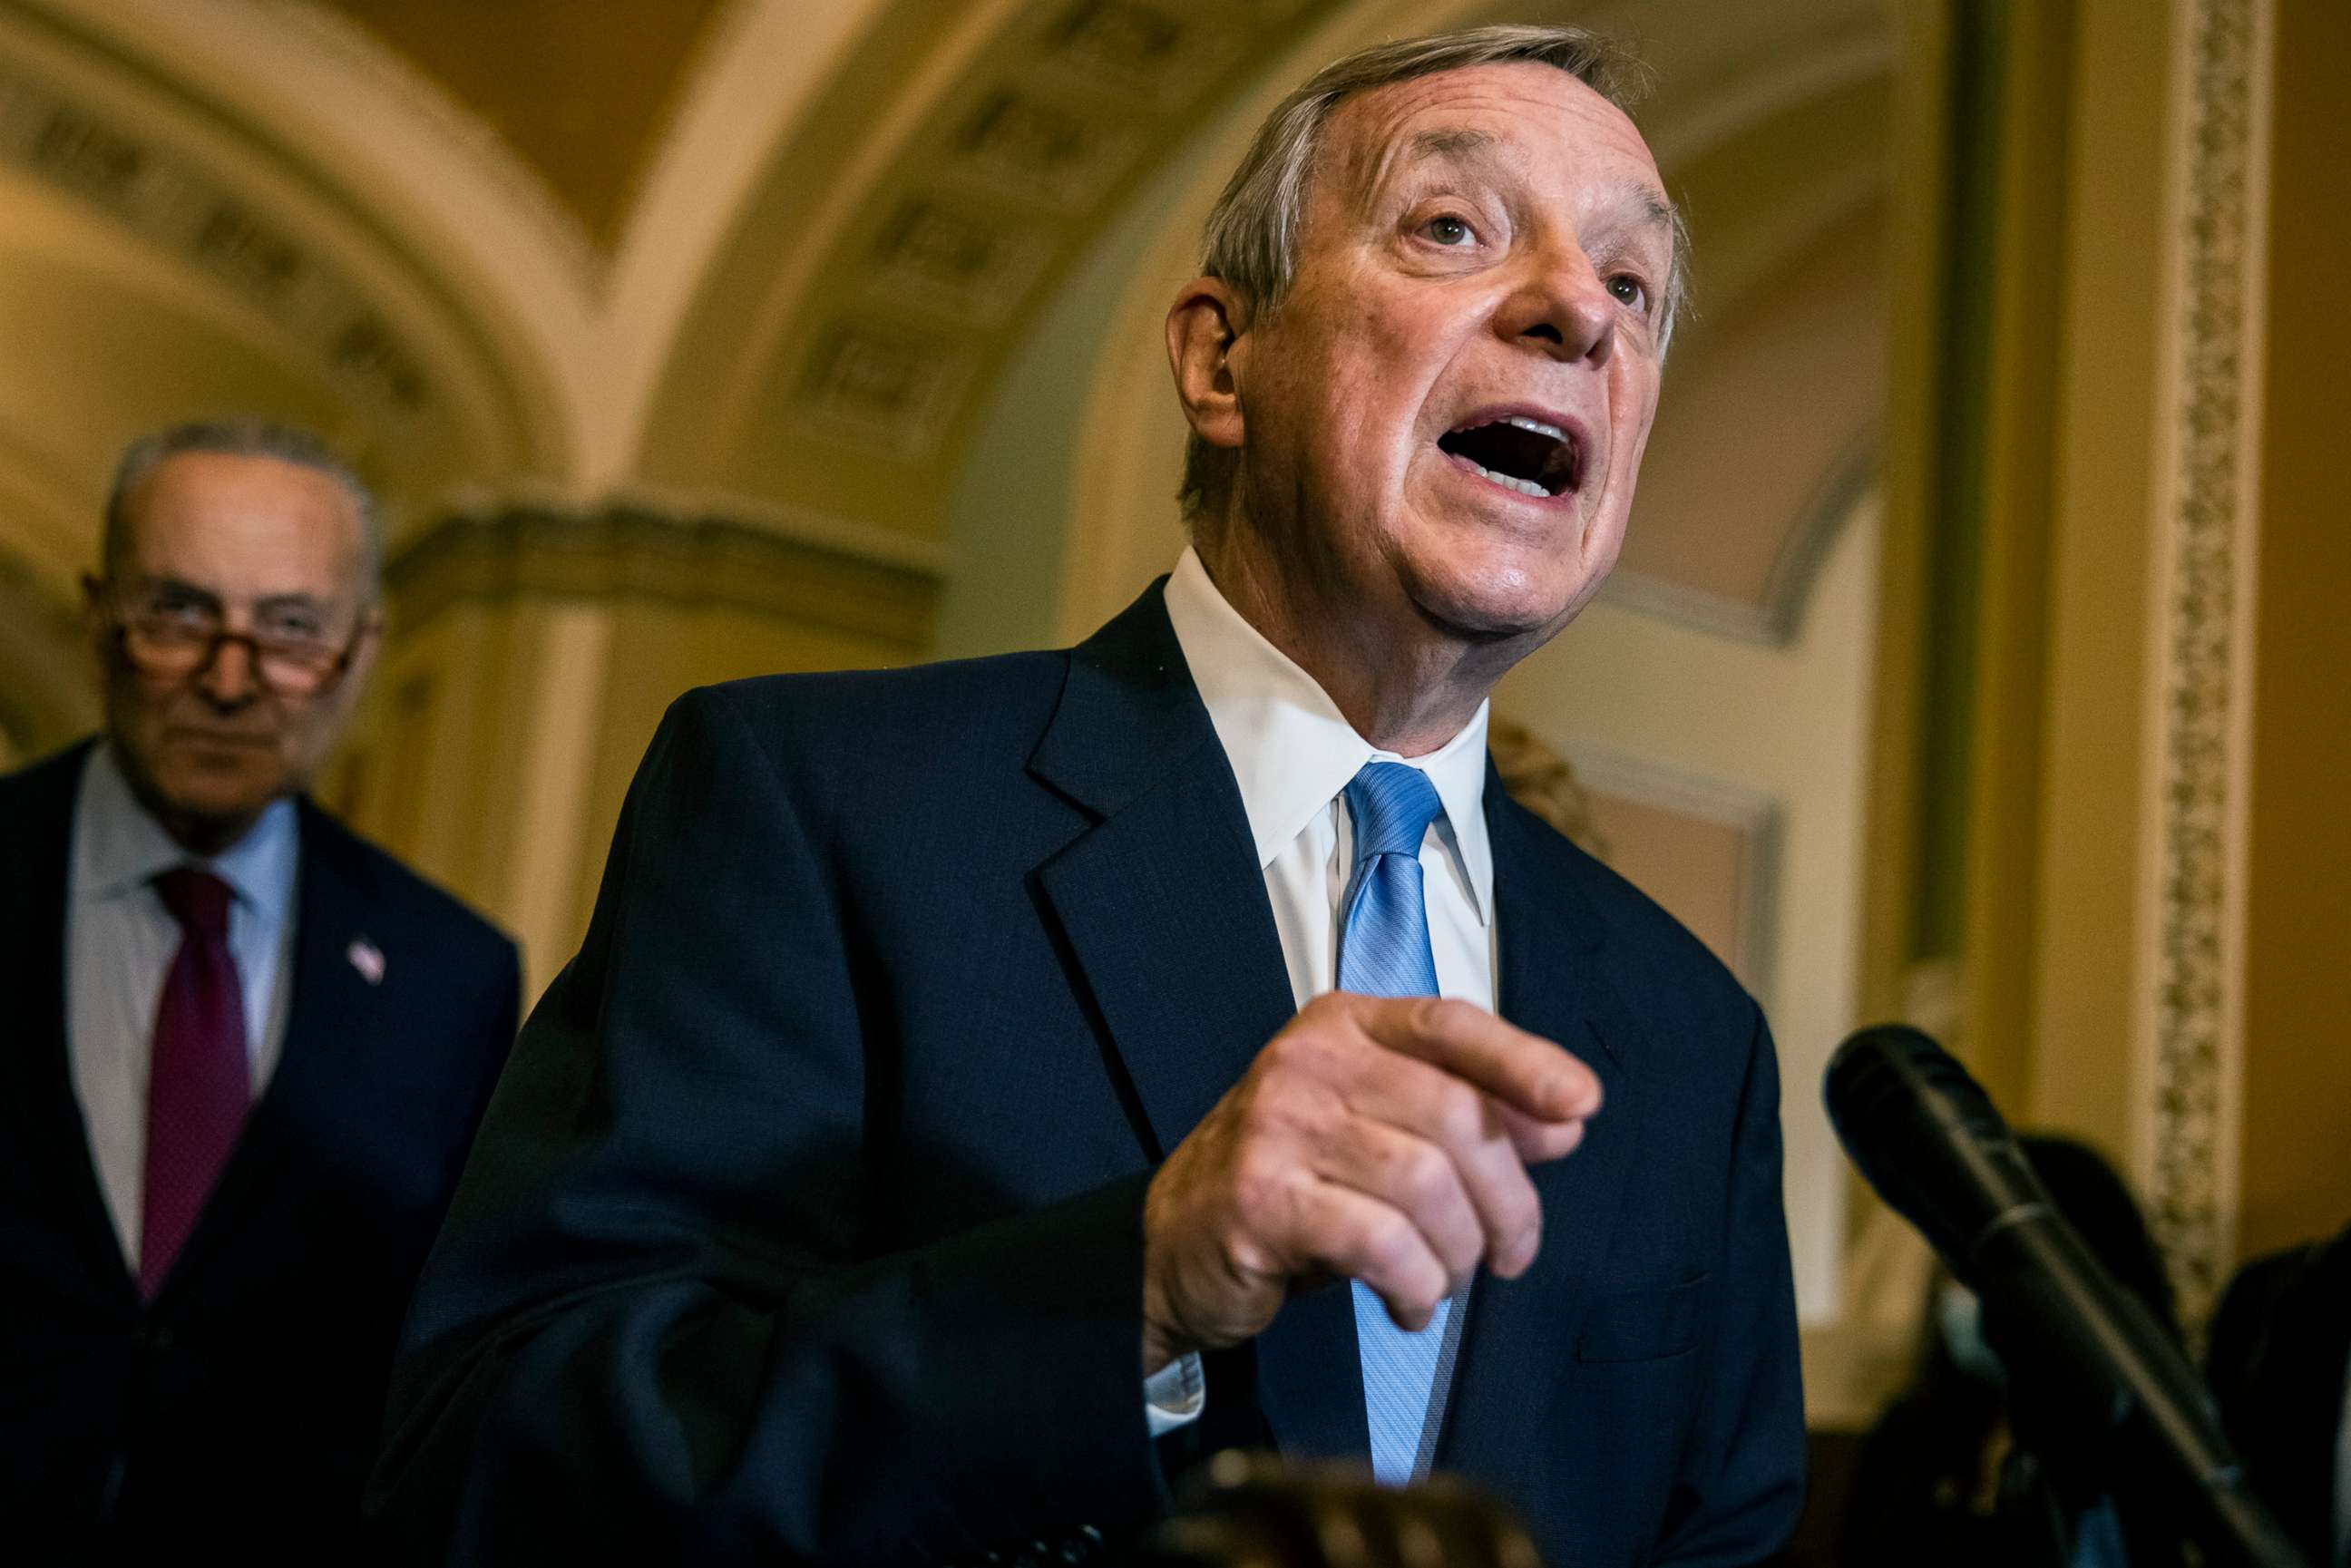 PHOTO: Sen. Dick Durbin speaks during a press conference following the Democrats Policy Luncheon at the Capitol, Oct. 26, 2021.